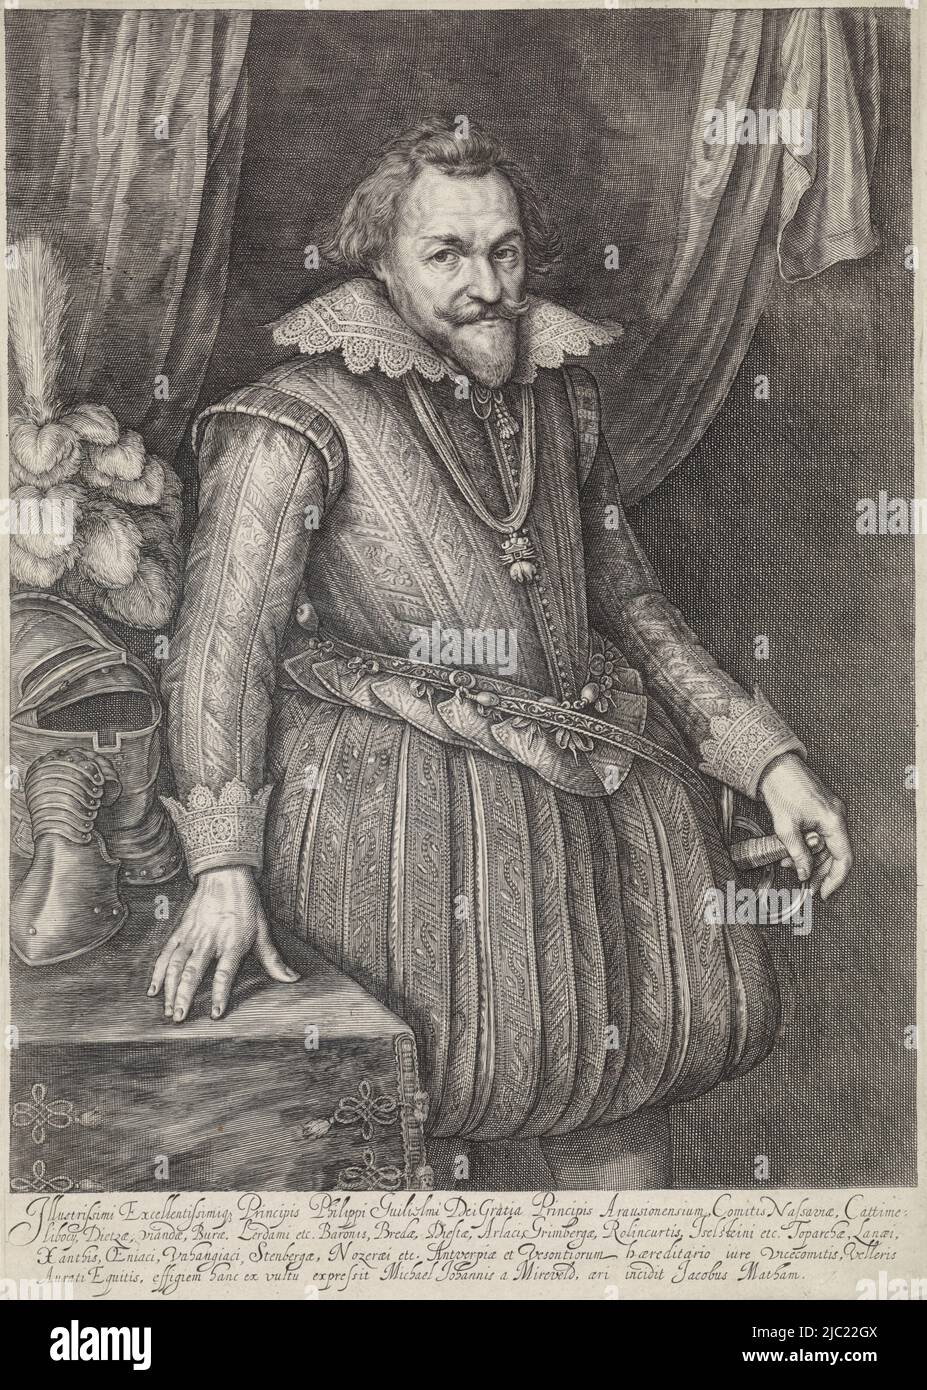 Kneepiece of Philip William, Prince of Orange, dressed in armor, standing beside table on which is a plumed helmet and glove. Behind him a drapery, Portrait Philip William, Prince of Orange, print maker: Jacob Matham, (mentioned on object), Michiel Jansz van Mierevelt, (mentioned on object), Haarlem, 1610 - 1618, paper, engraving, h 410 mm × w 292 mm Stock Photo